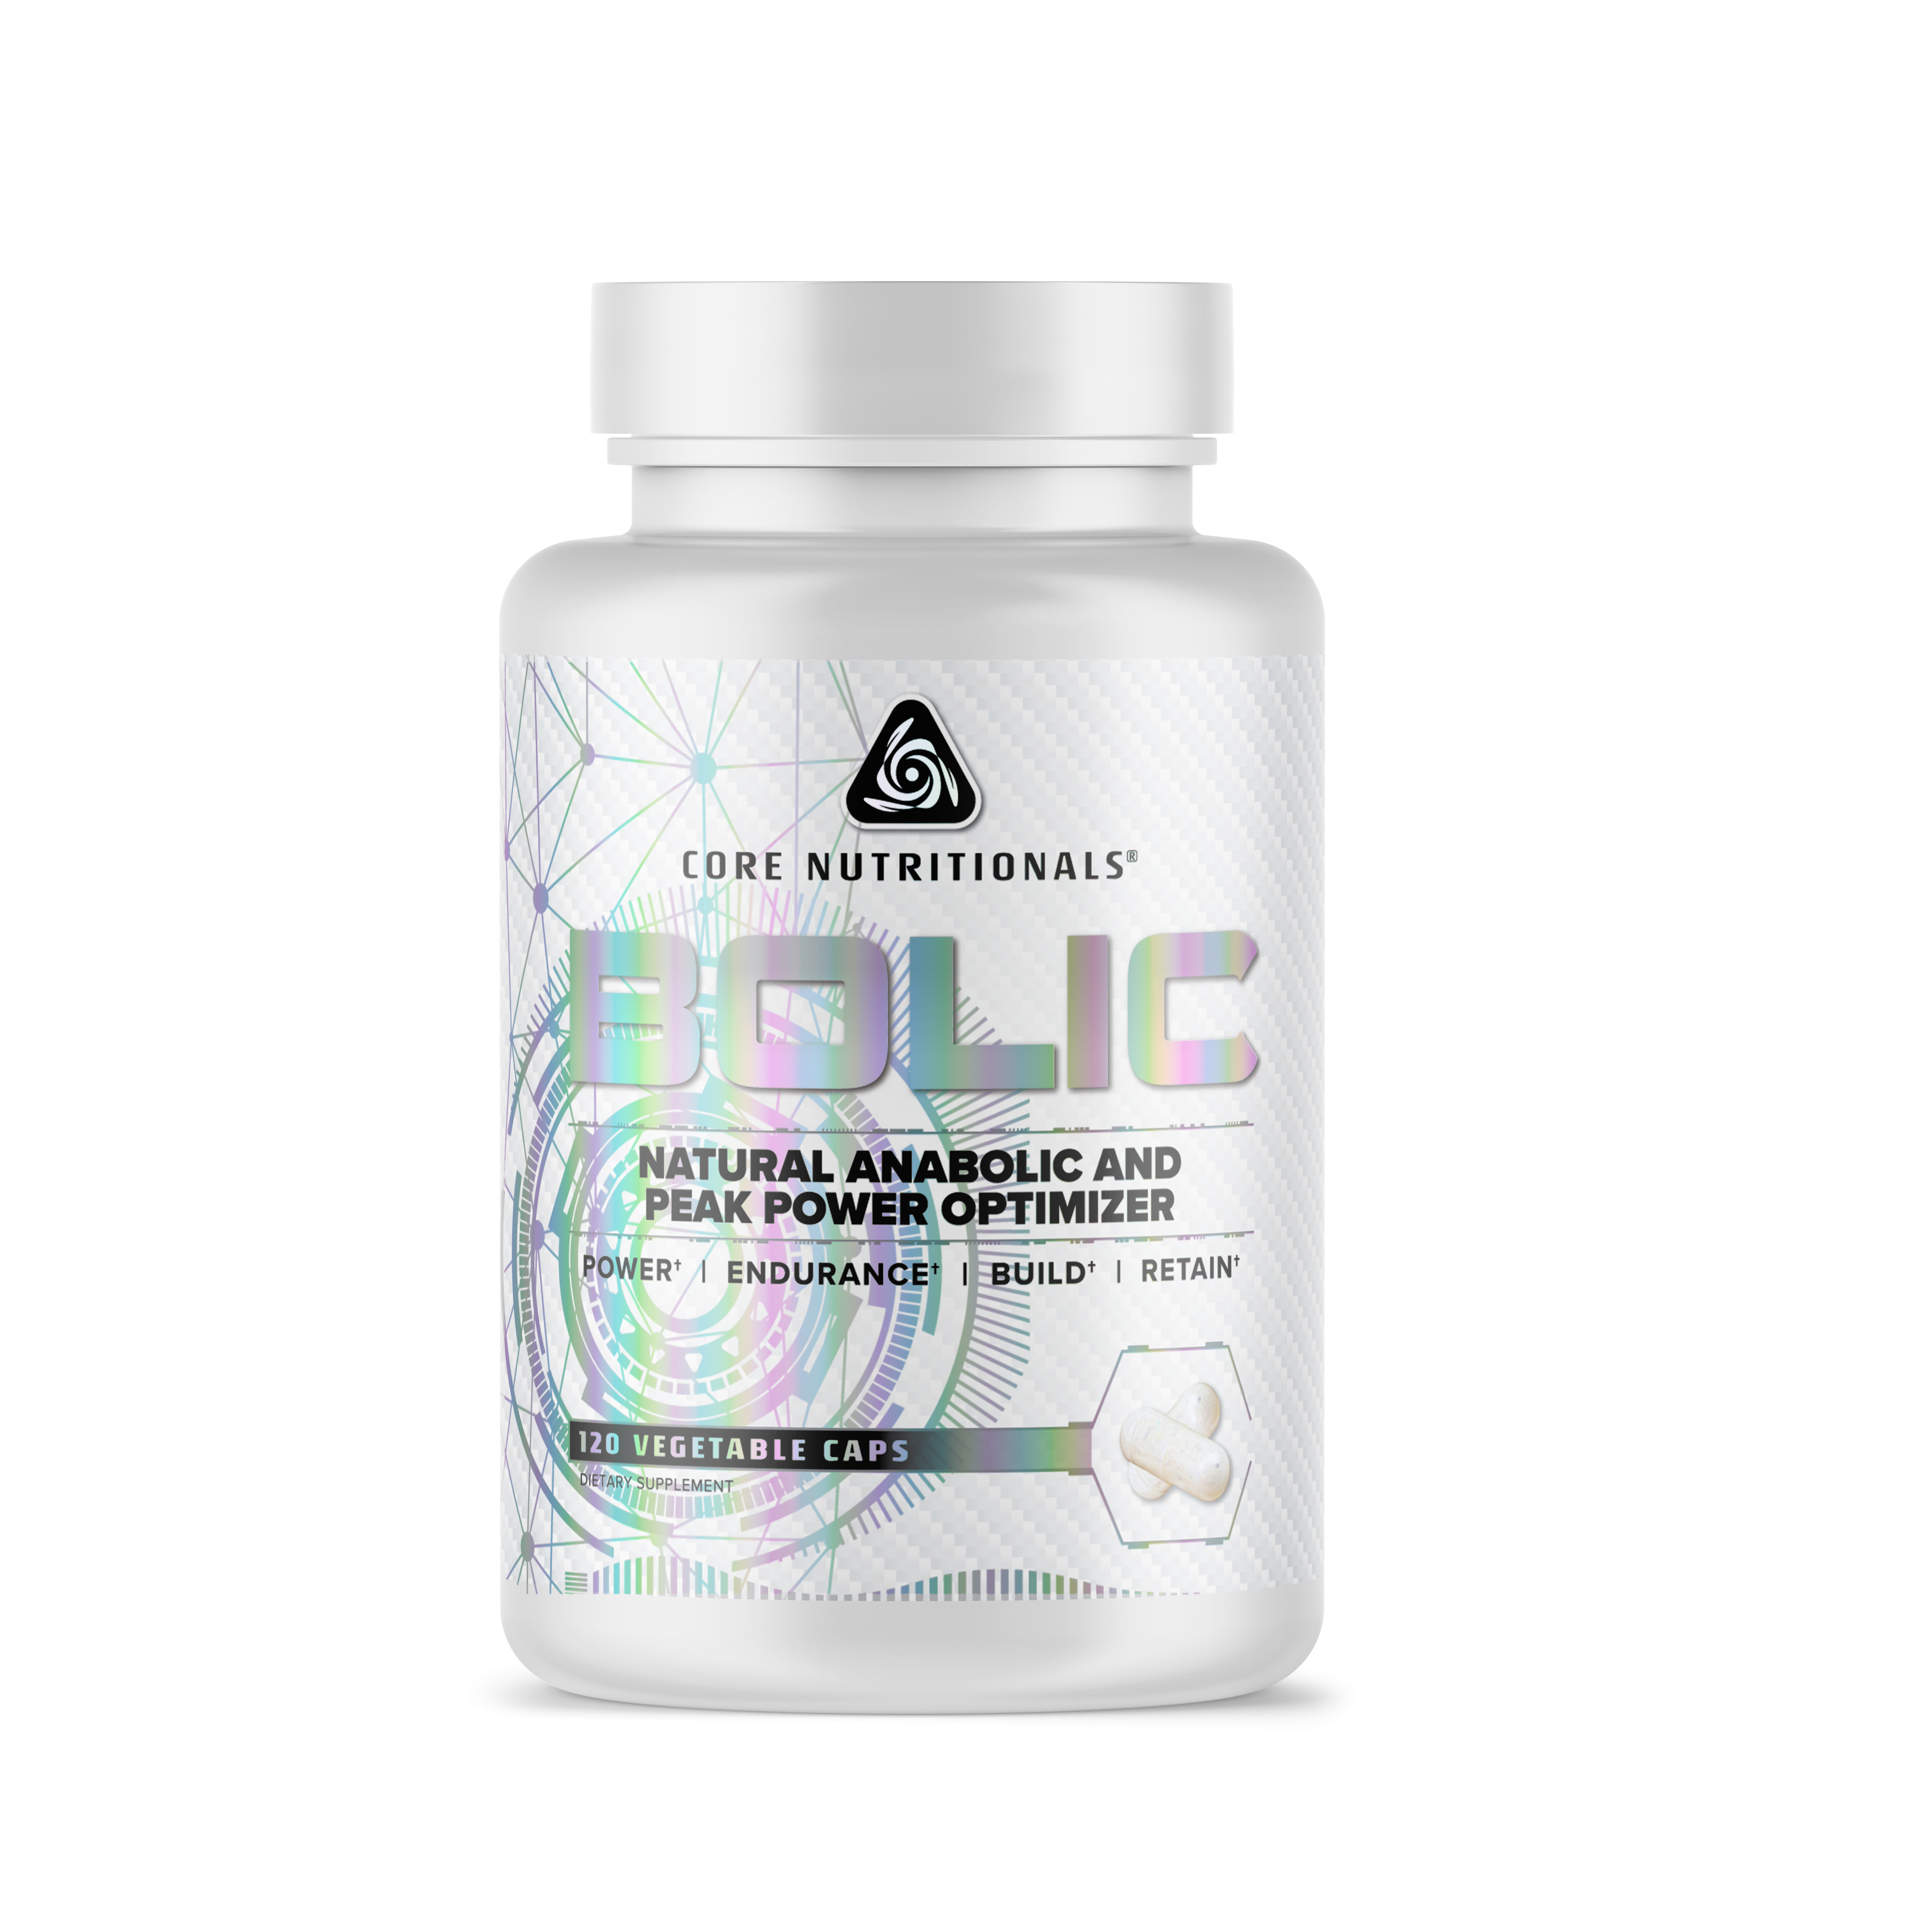 Core Nutritionals Bolic (120 caps) – Muscle Building – Professional Supplements & Protein From A-list Nutrition